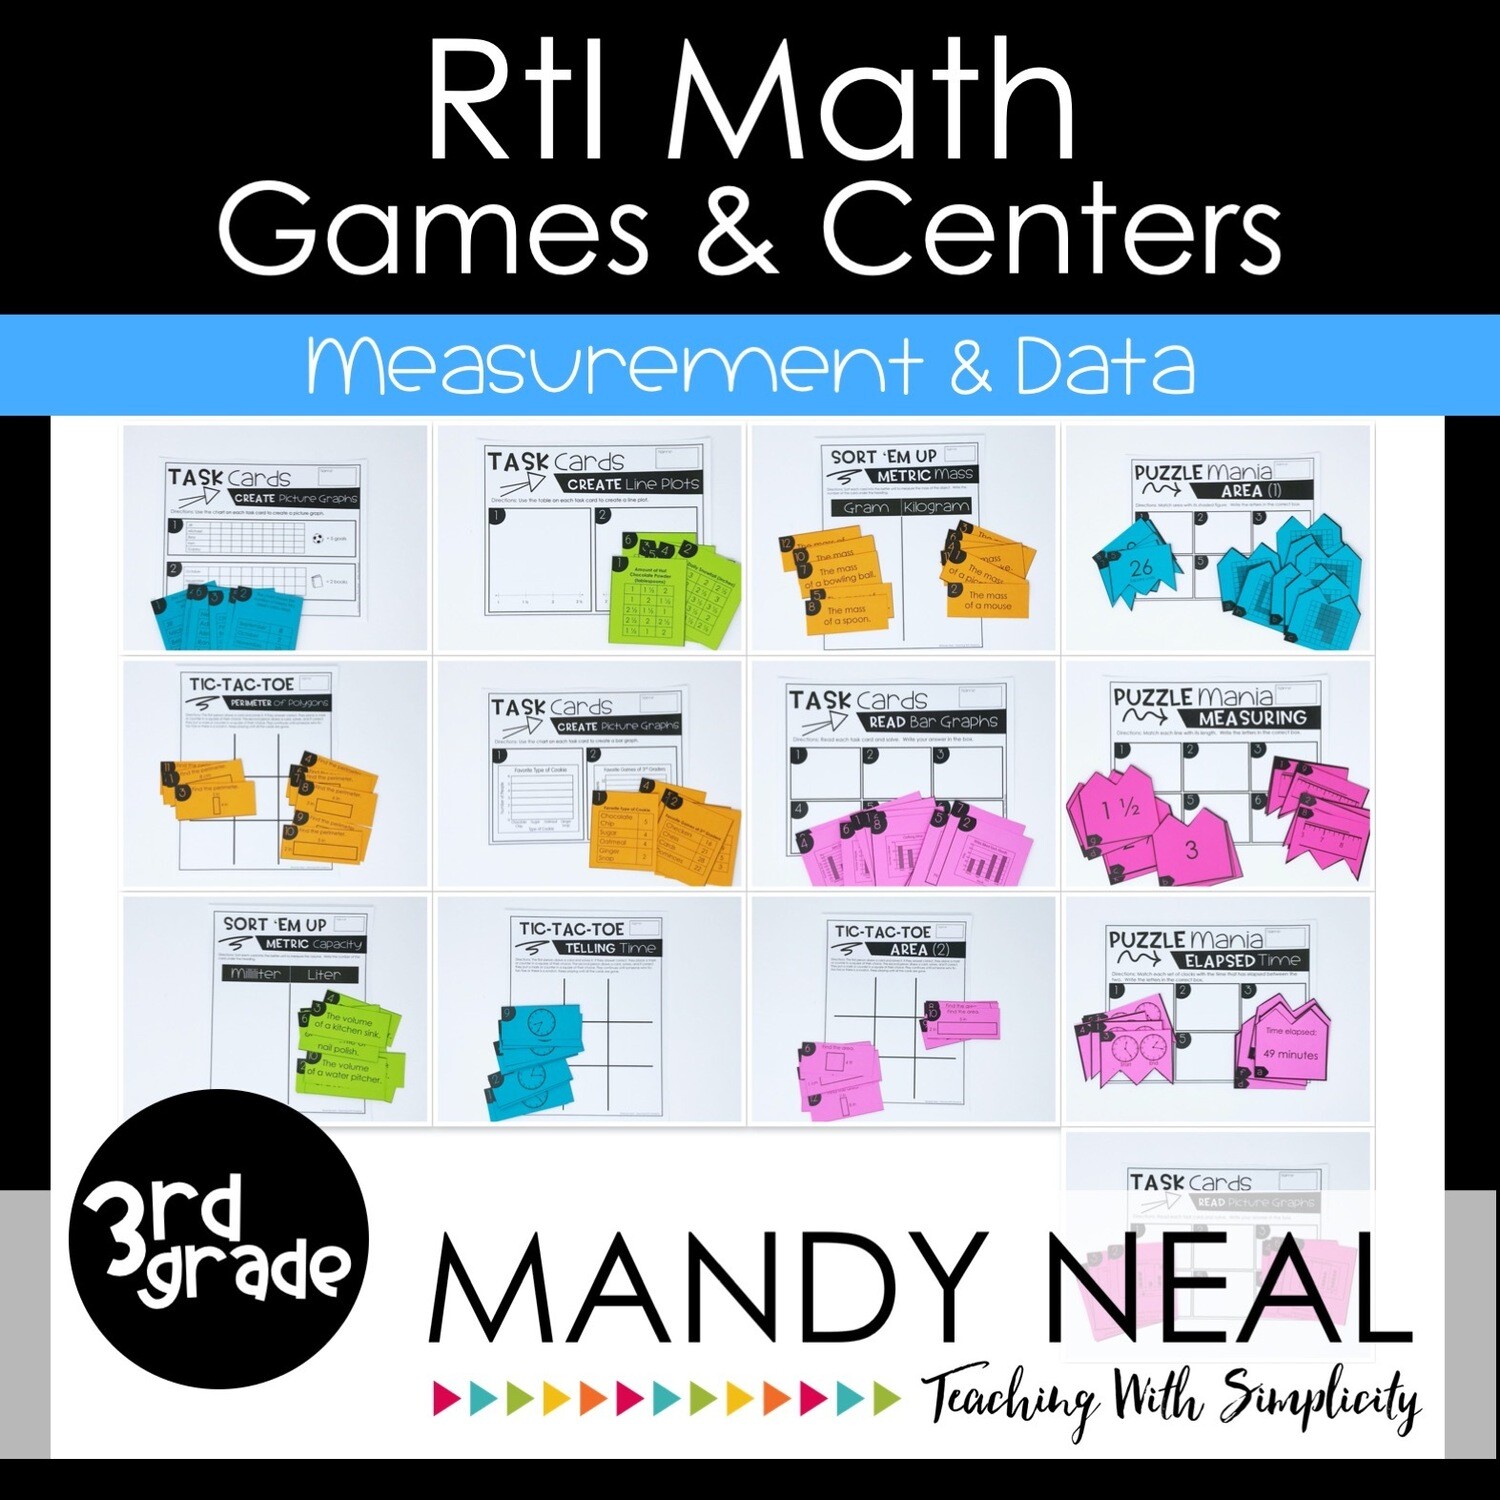 3rd Grade Math Intervention Games and Centers for Measurement & Data